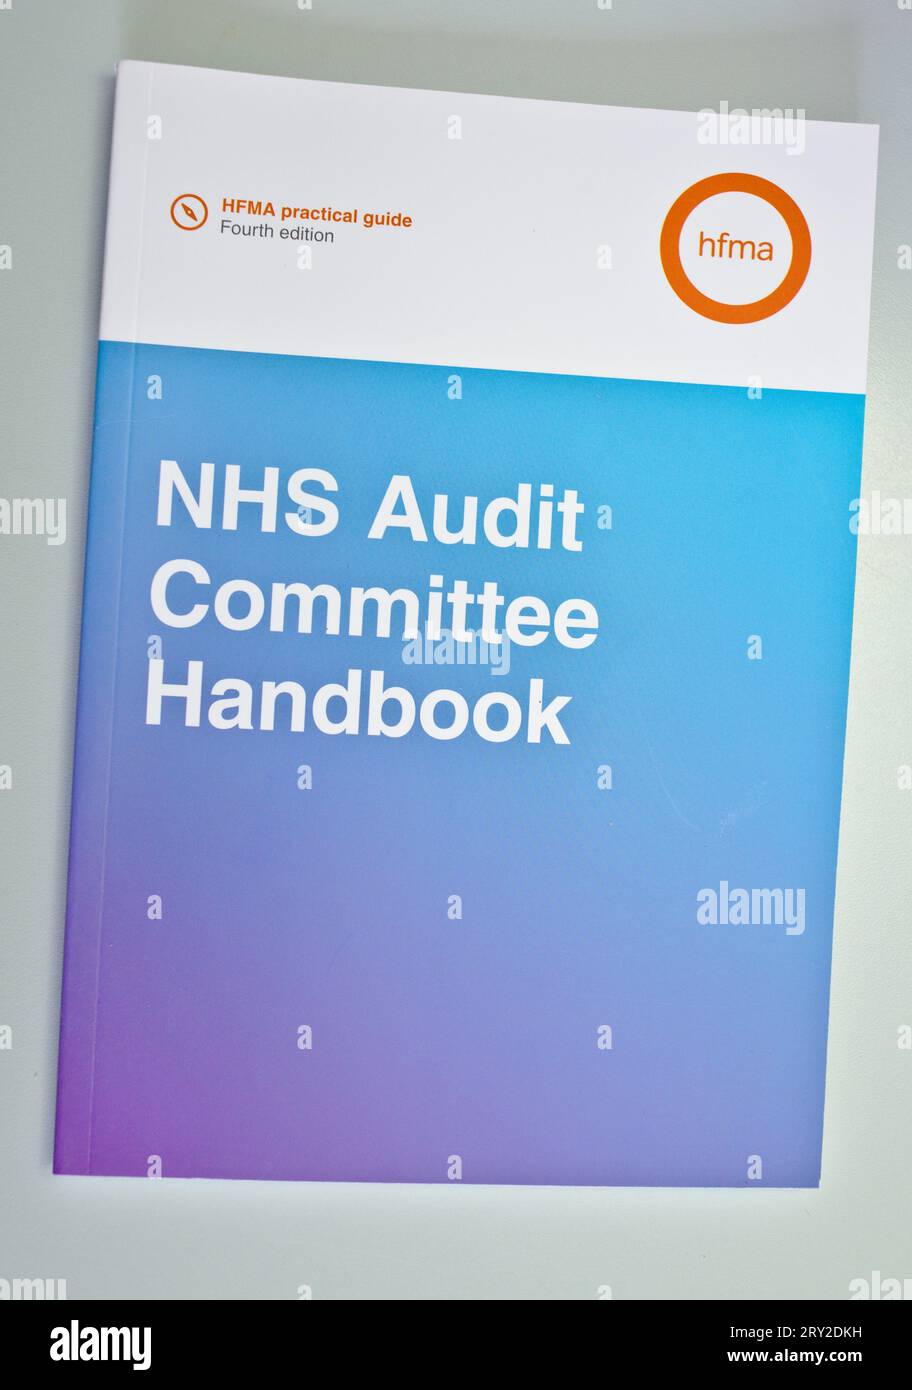 HFMA handbook on NHS audit for finance staff working in healthcare Stock Photo